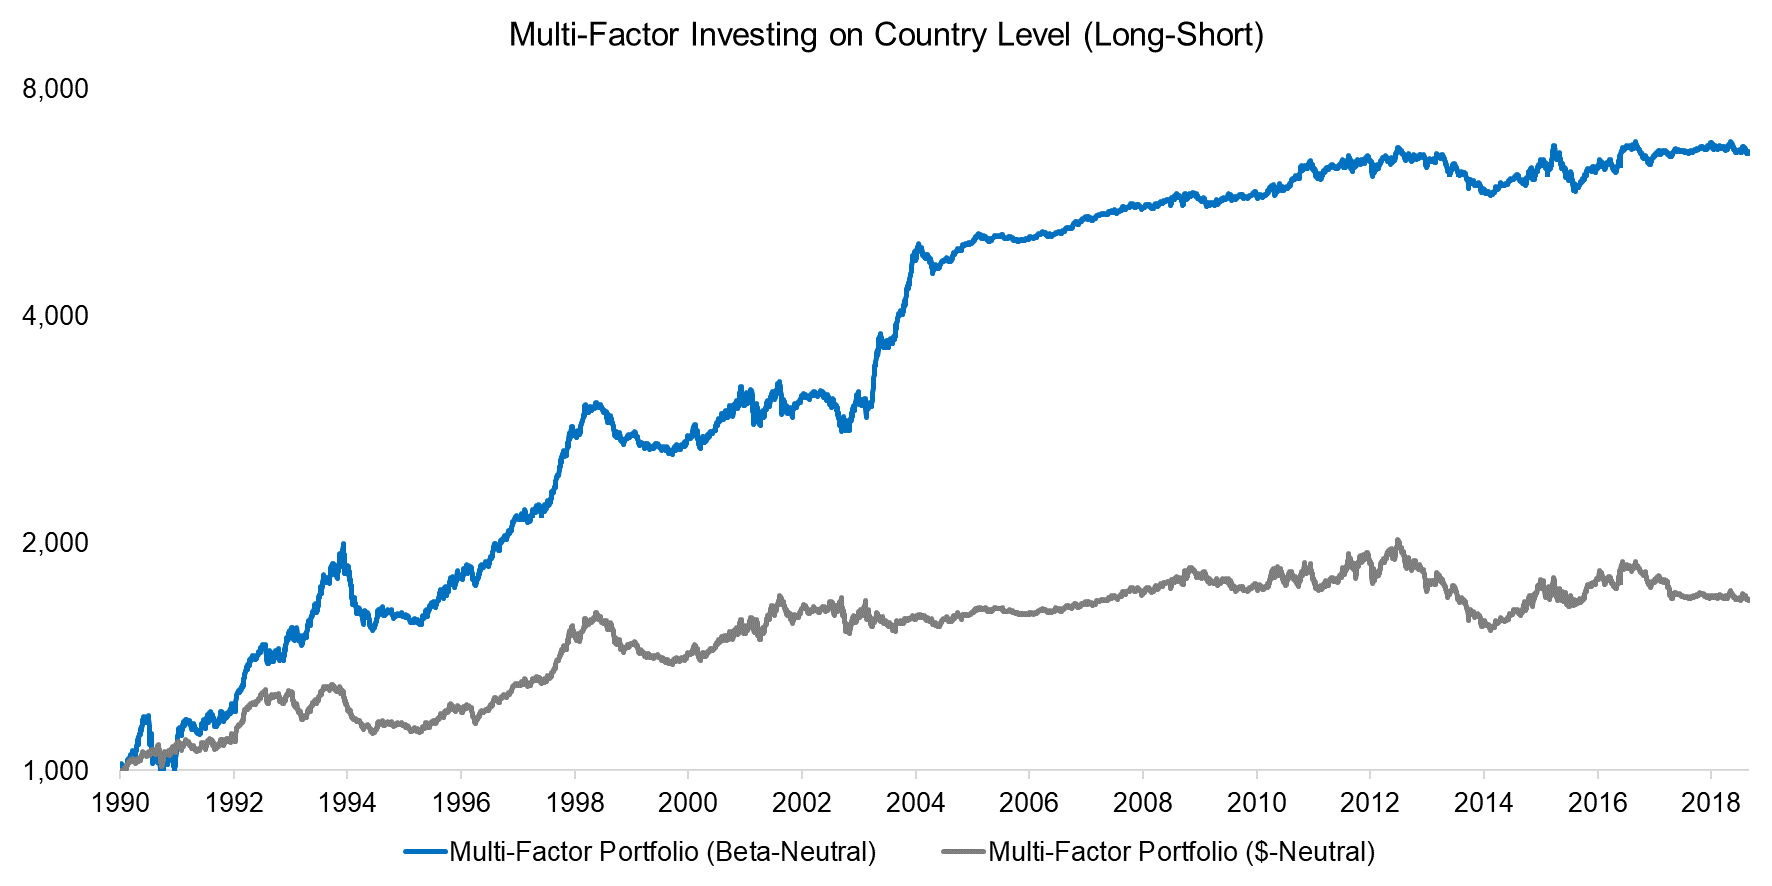 Multi-Factor Investing on Country Level (Long-Short)